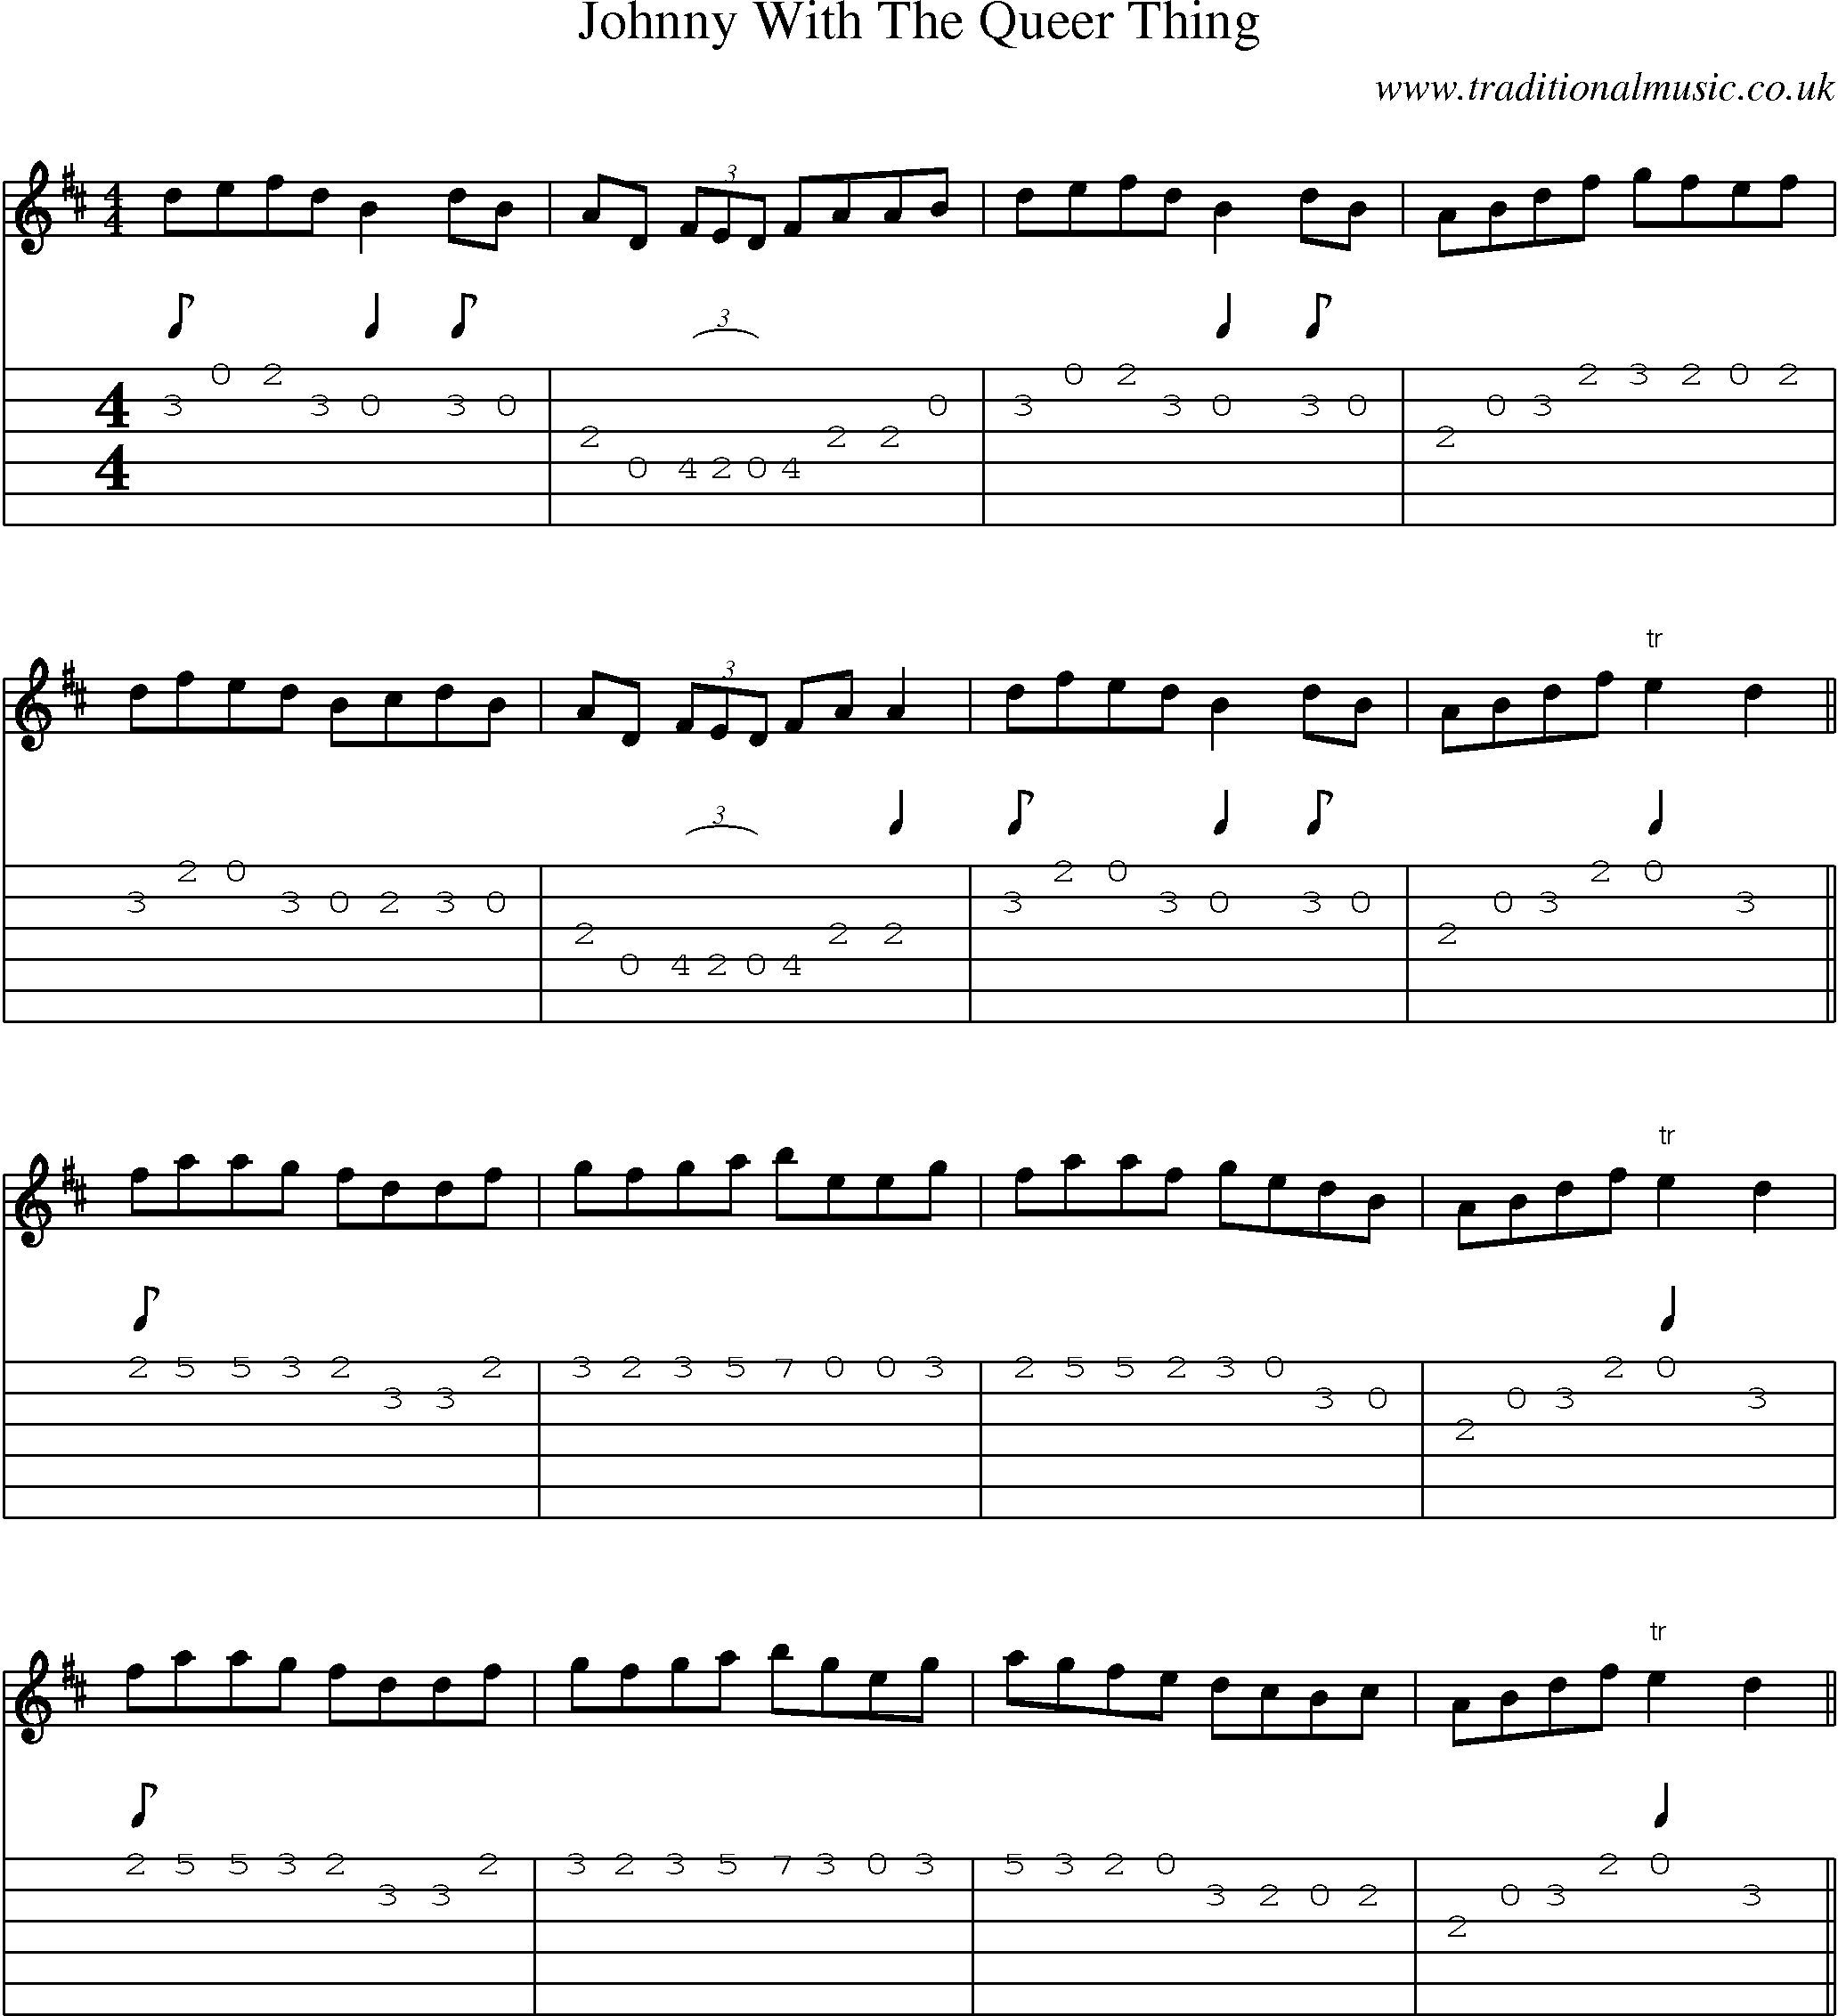 Music Score and Guitar Tabs for Johnny With Queer Thing